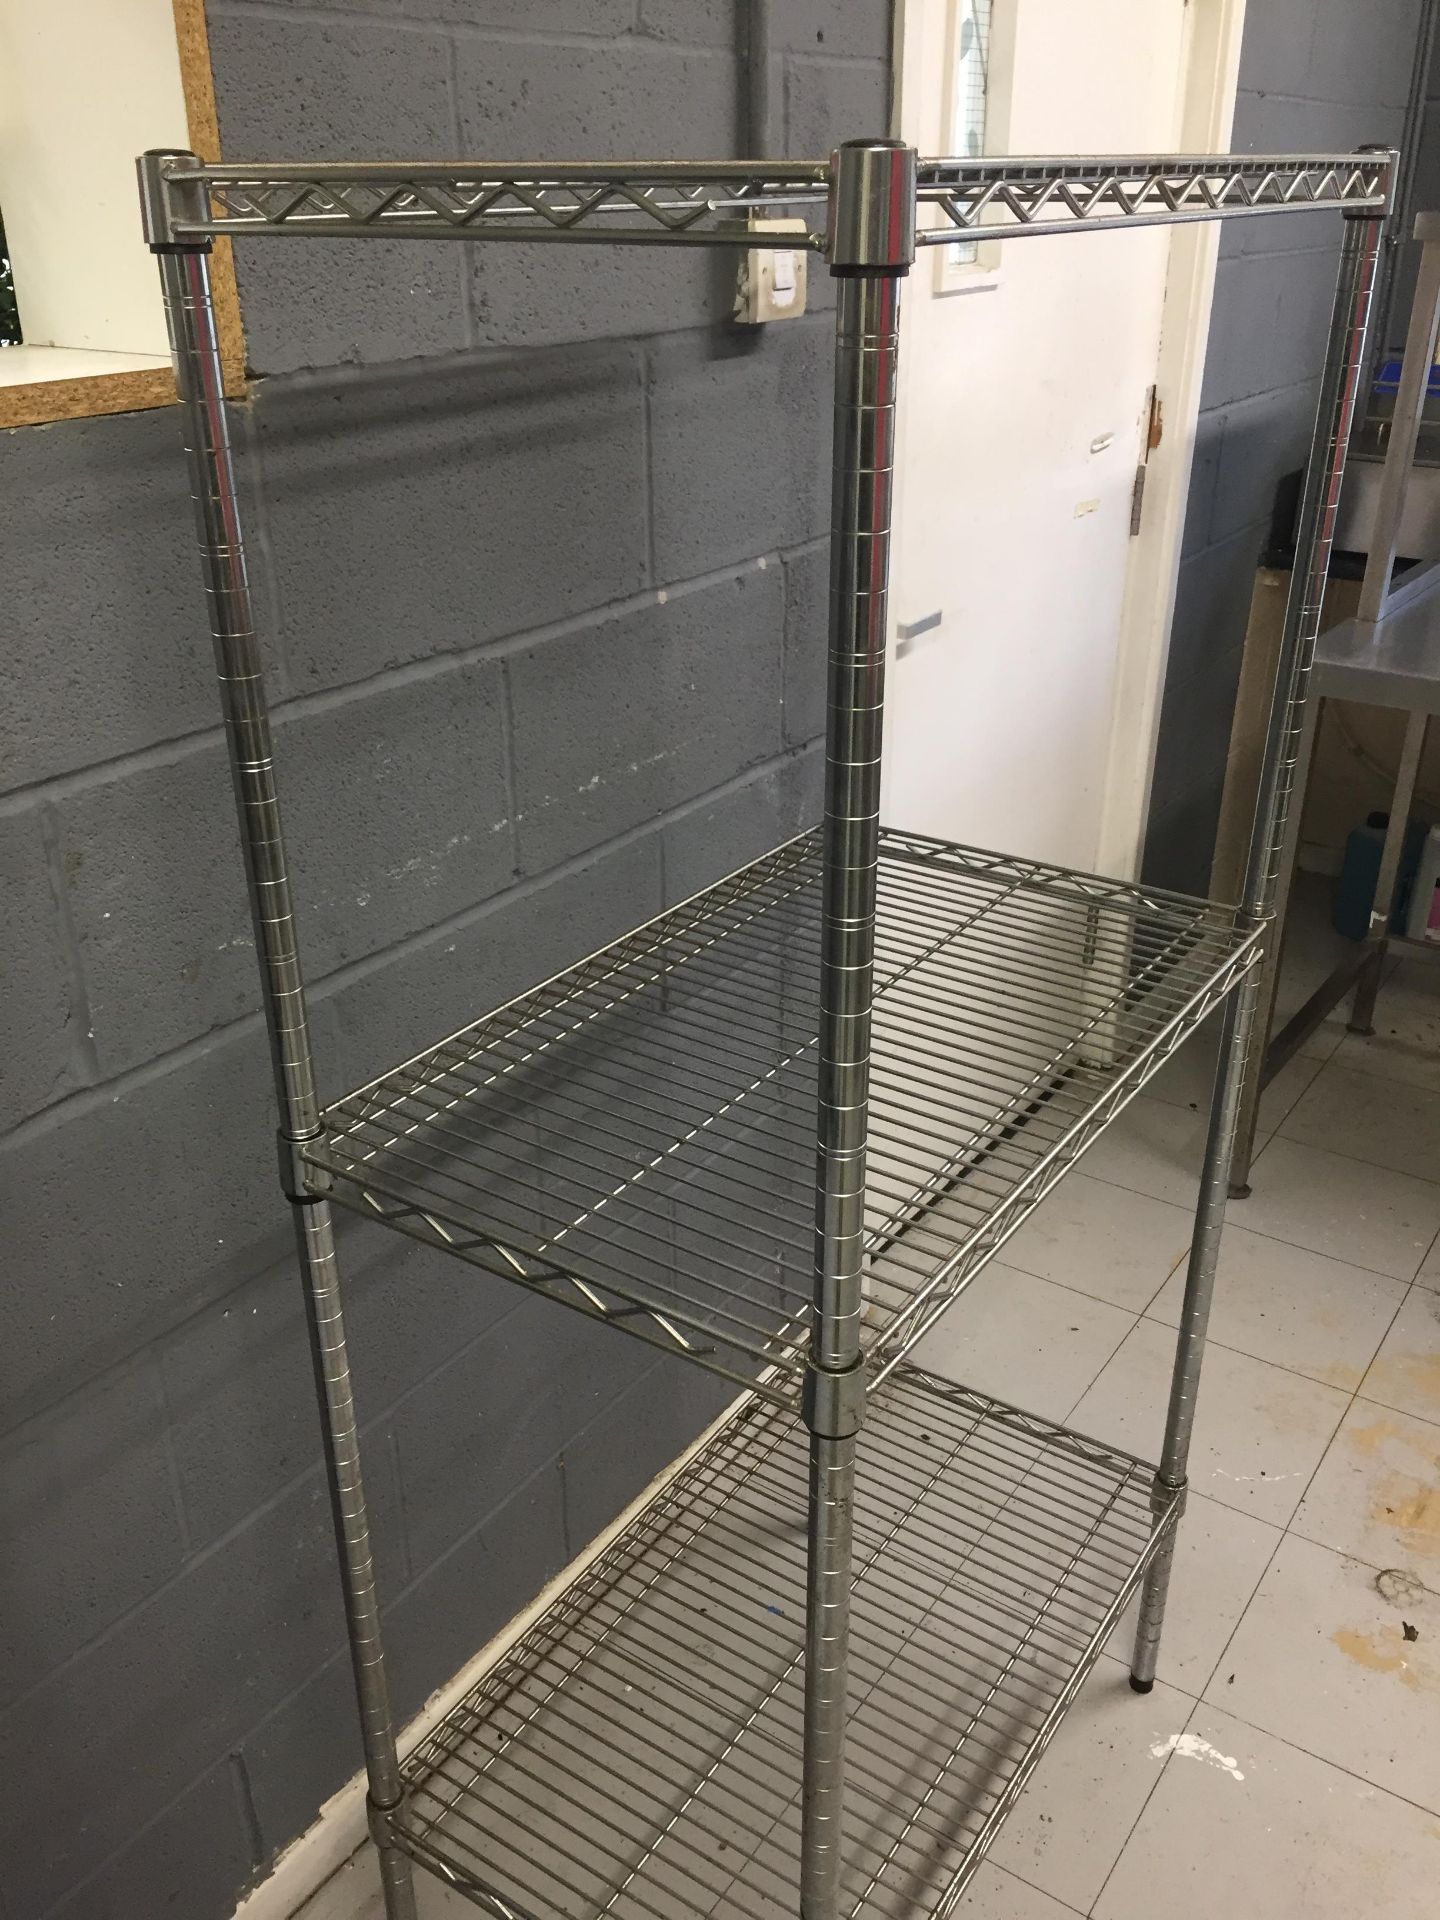 Stainless Steel Shelving Unit - Image 3 of 4